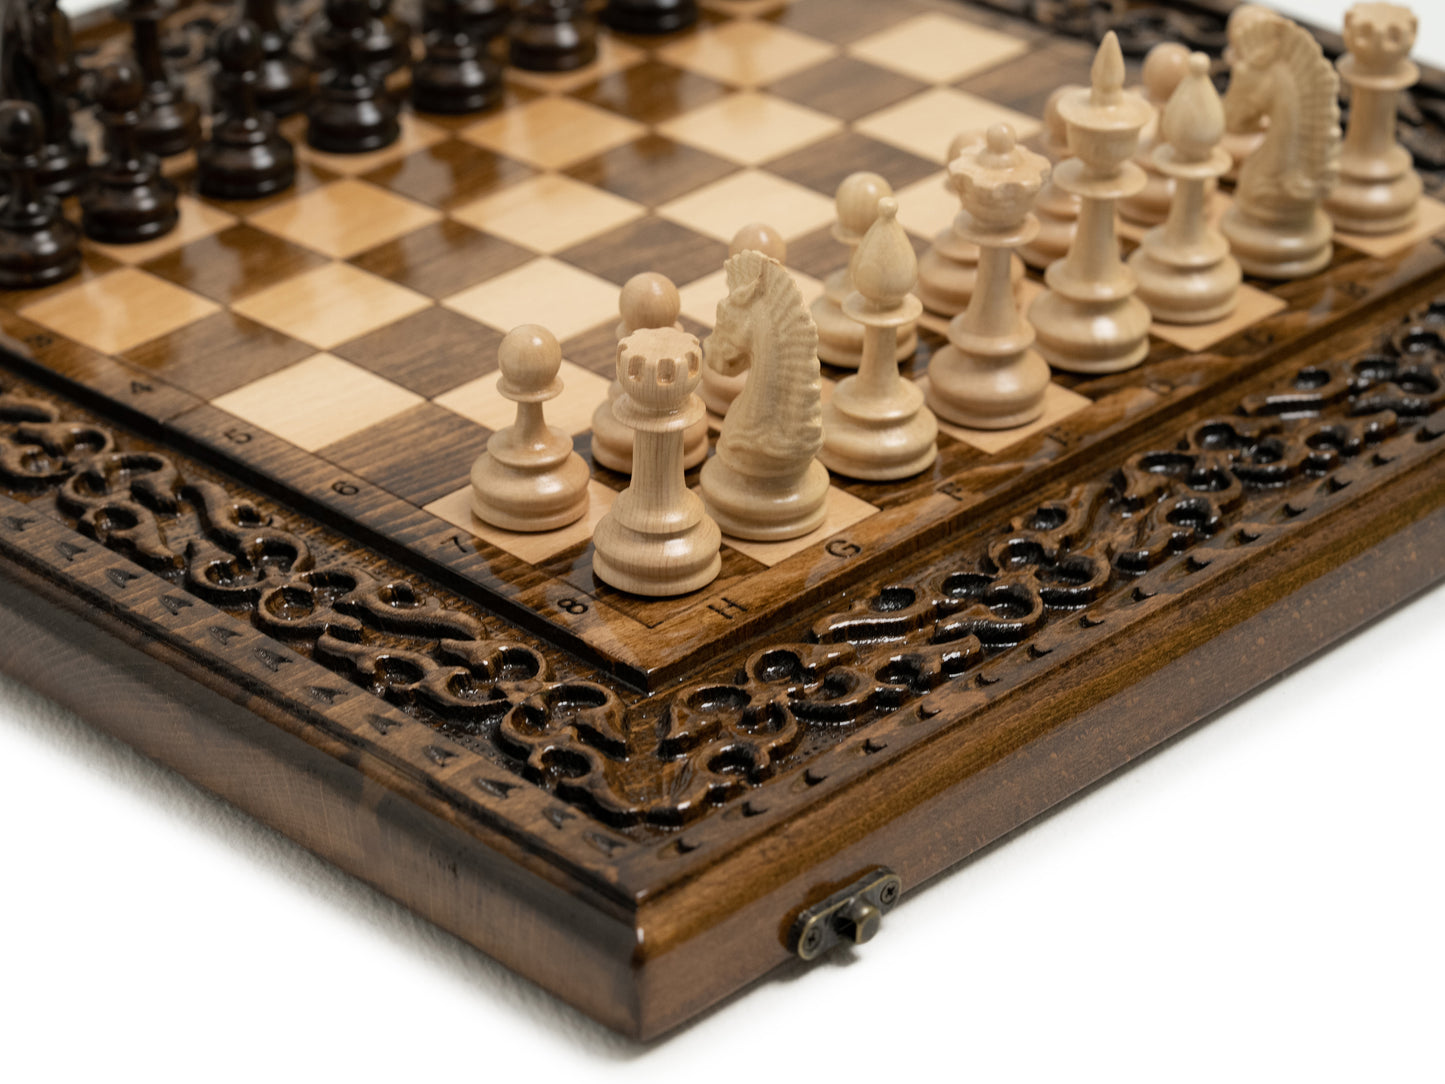 Handcrafted chess set featuring intricate woodwork